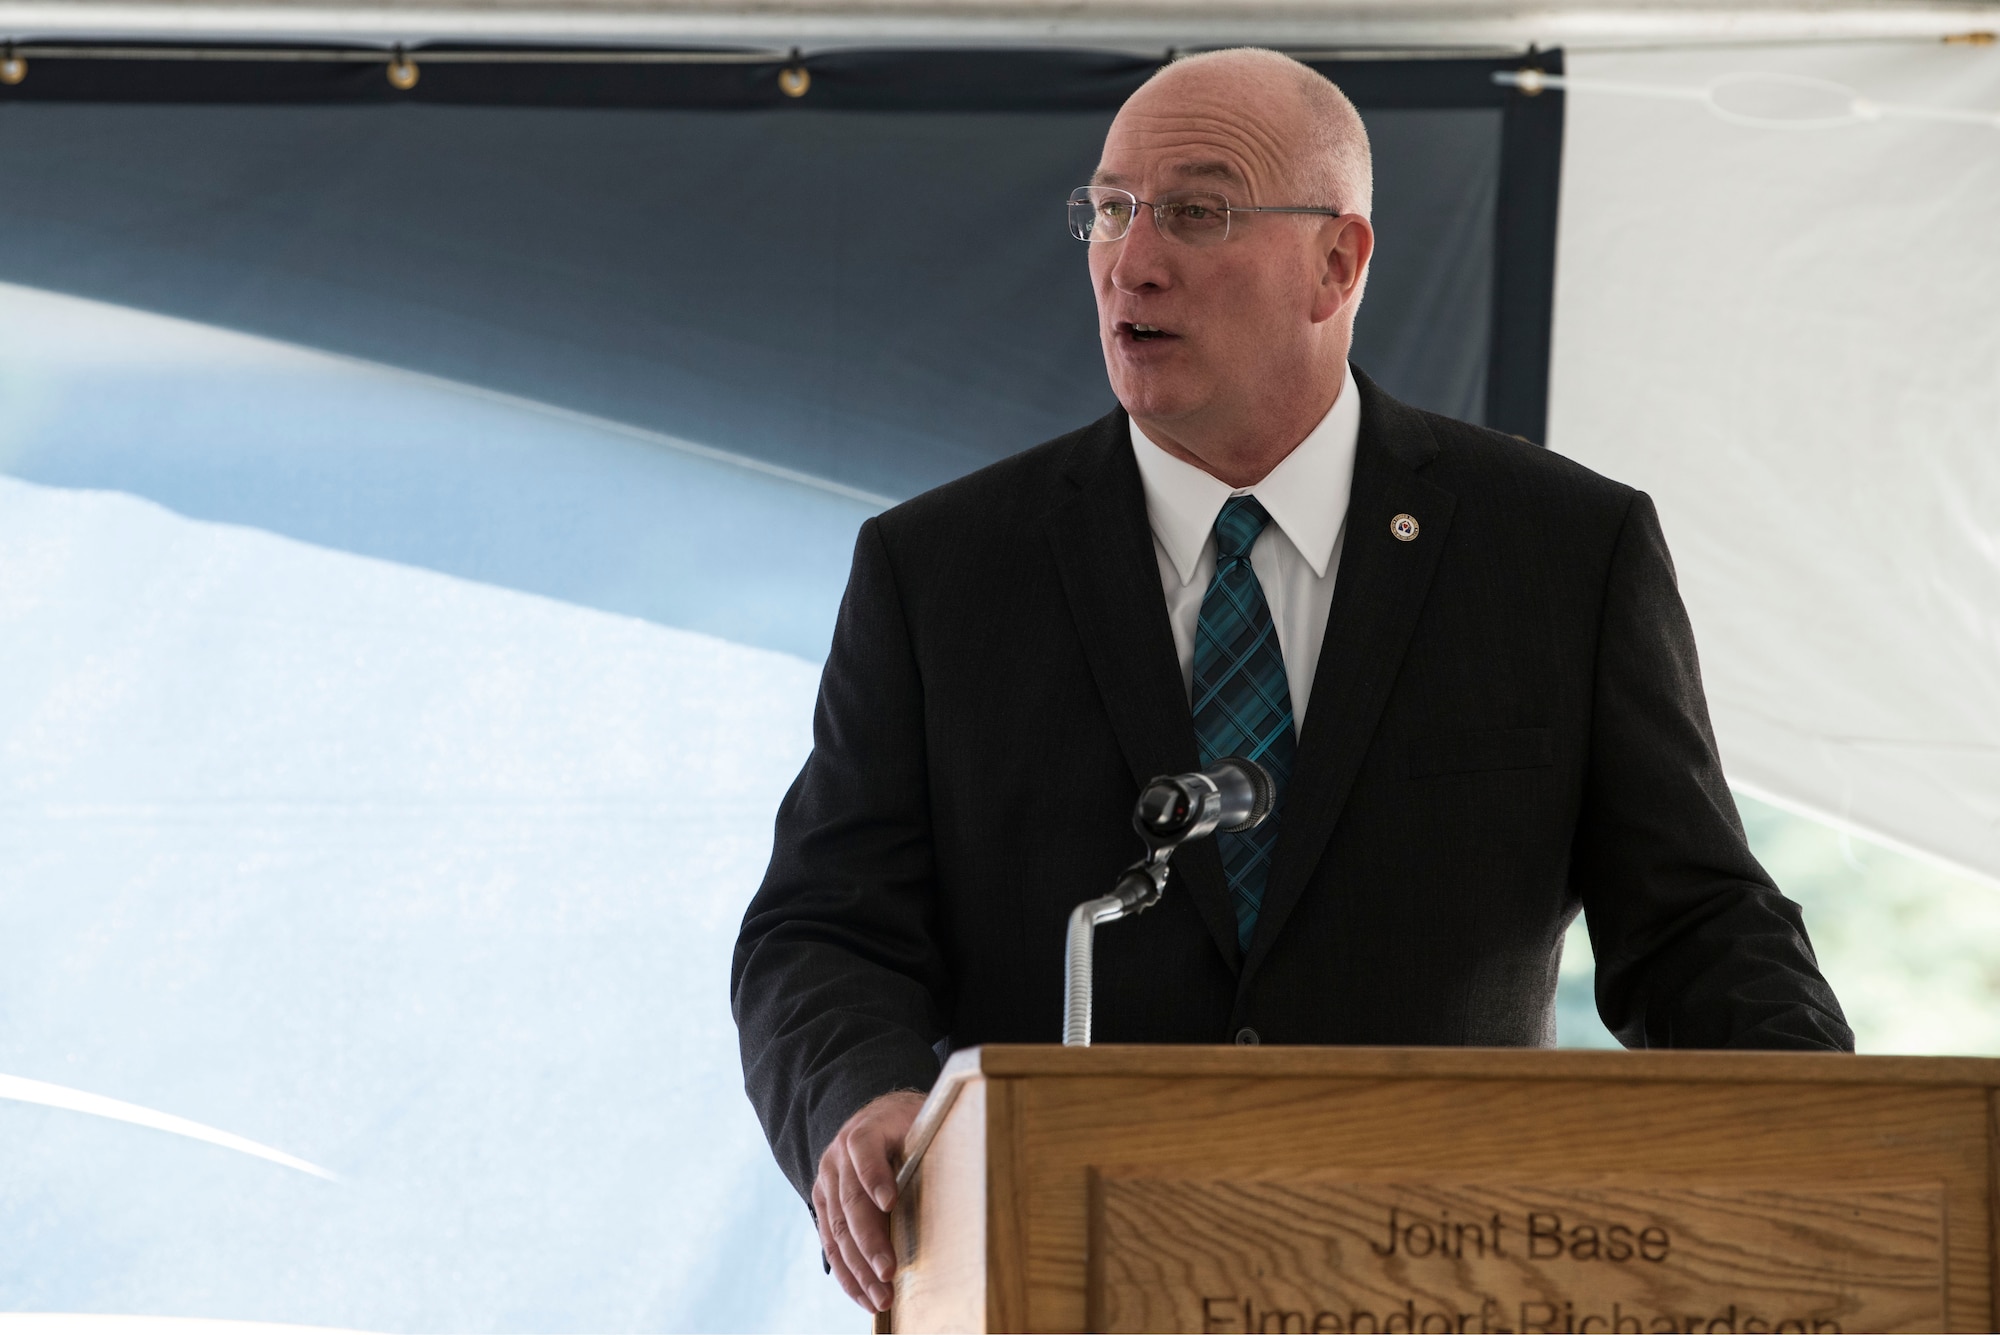 David Coker, Fisher House Foundation president, speaks during the opening ceremony for Fisher House II at Joint Base Elmendorf-Richardson, Alaska, Sep. 10, 2018. The opening ceremony featured an array of key speakers, the 9th Army Band, Air Force Honor Guard, a ribbon-cutting and a walk-through. The Fisher House program is a unique private-public partnership established to improve the quality of life for military members, retirees, veterans and their families